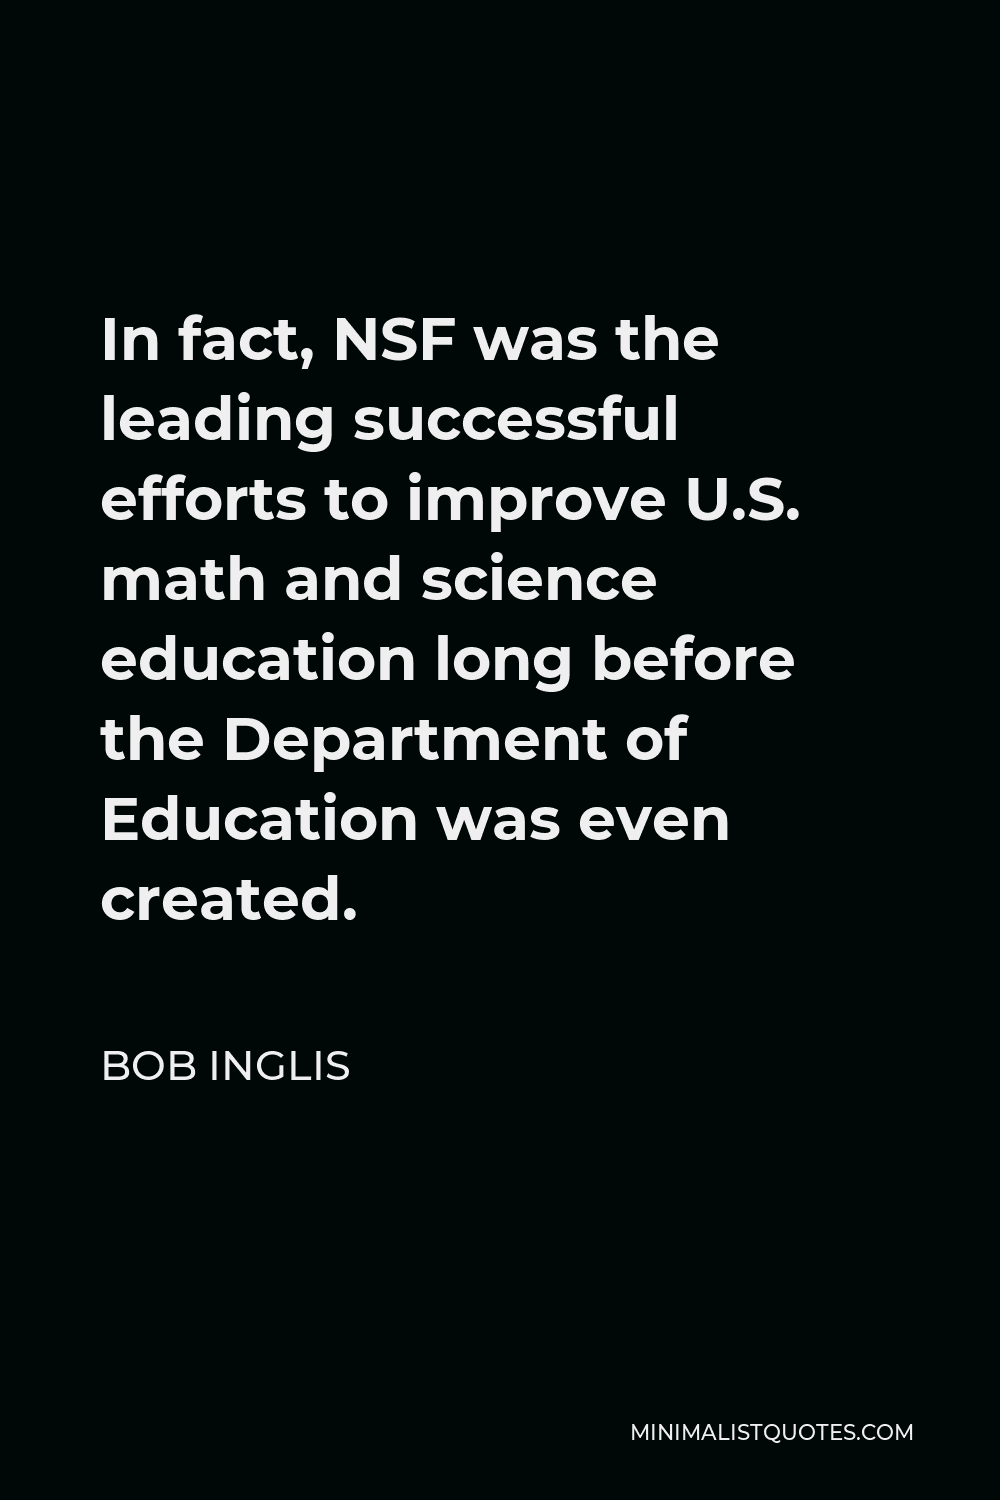 Bob Inglis Quote - In fact, NSF was the leading successful efforts to improve U.S. math and science education long before the Department of Education was even created.